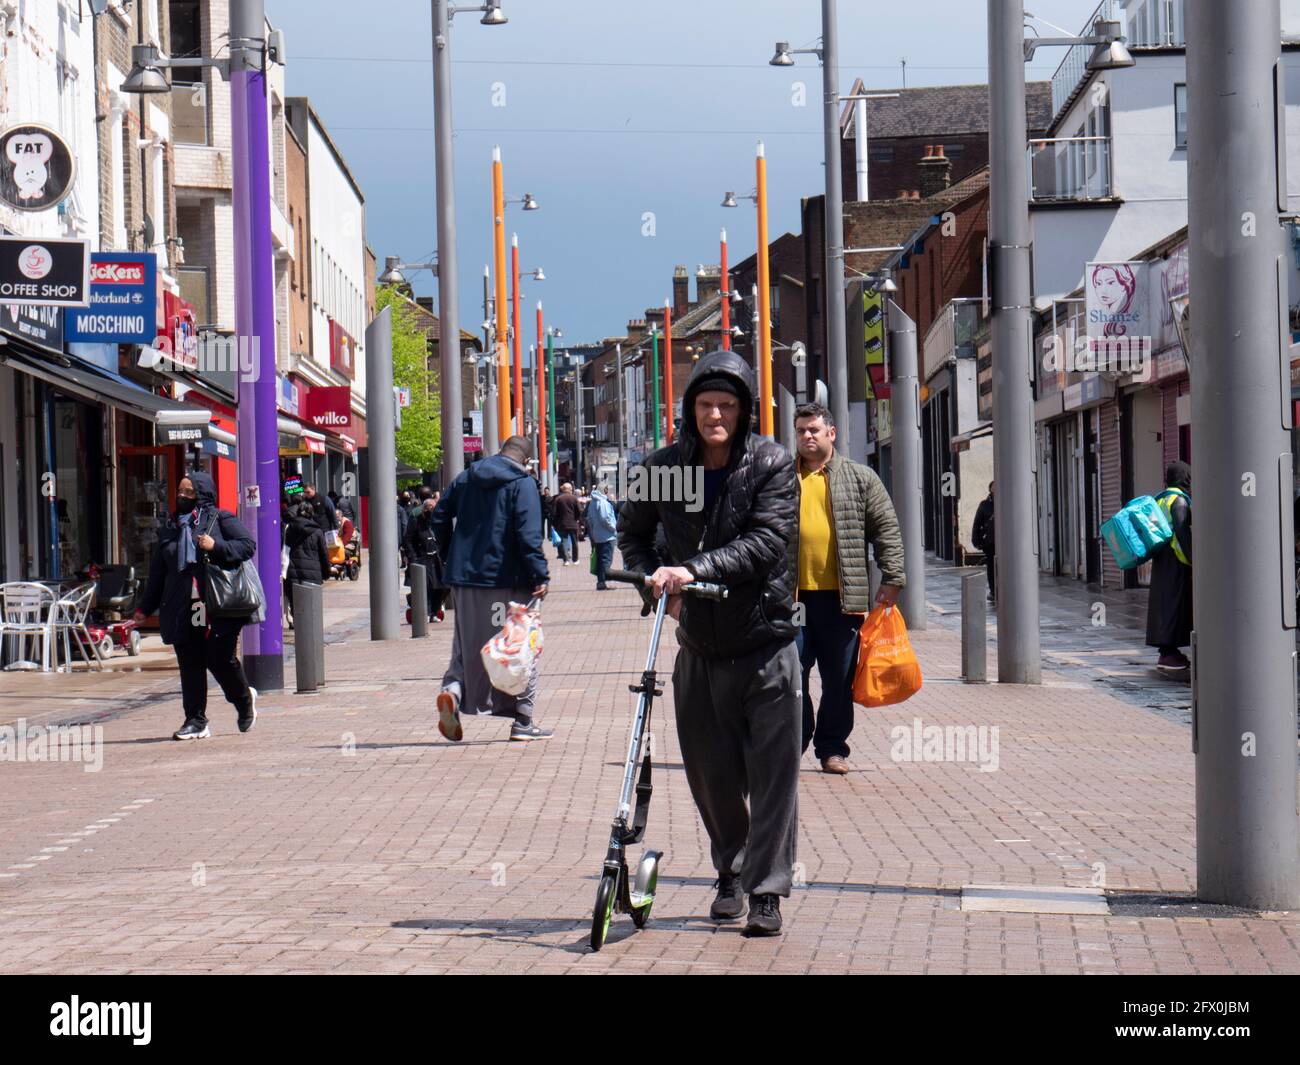 Walthamstow High Street, London, shopper  with scooter Stock Photo